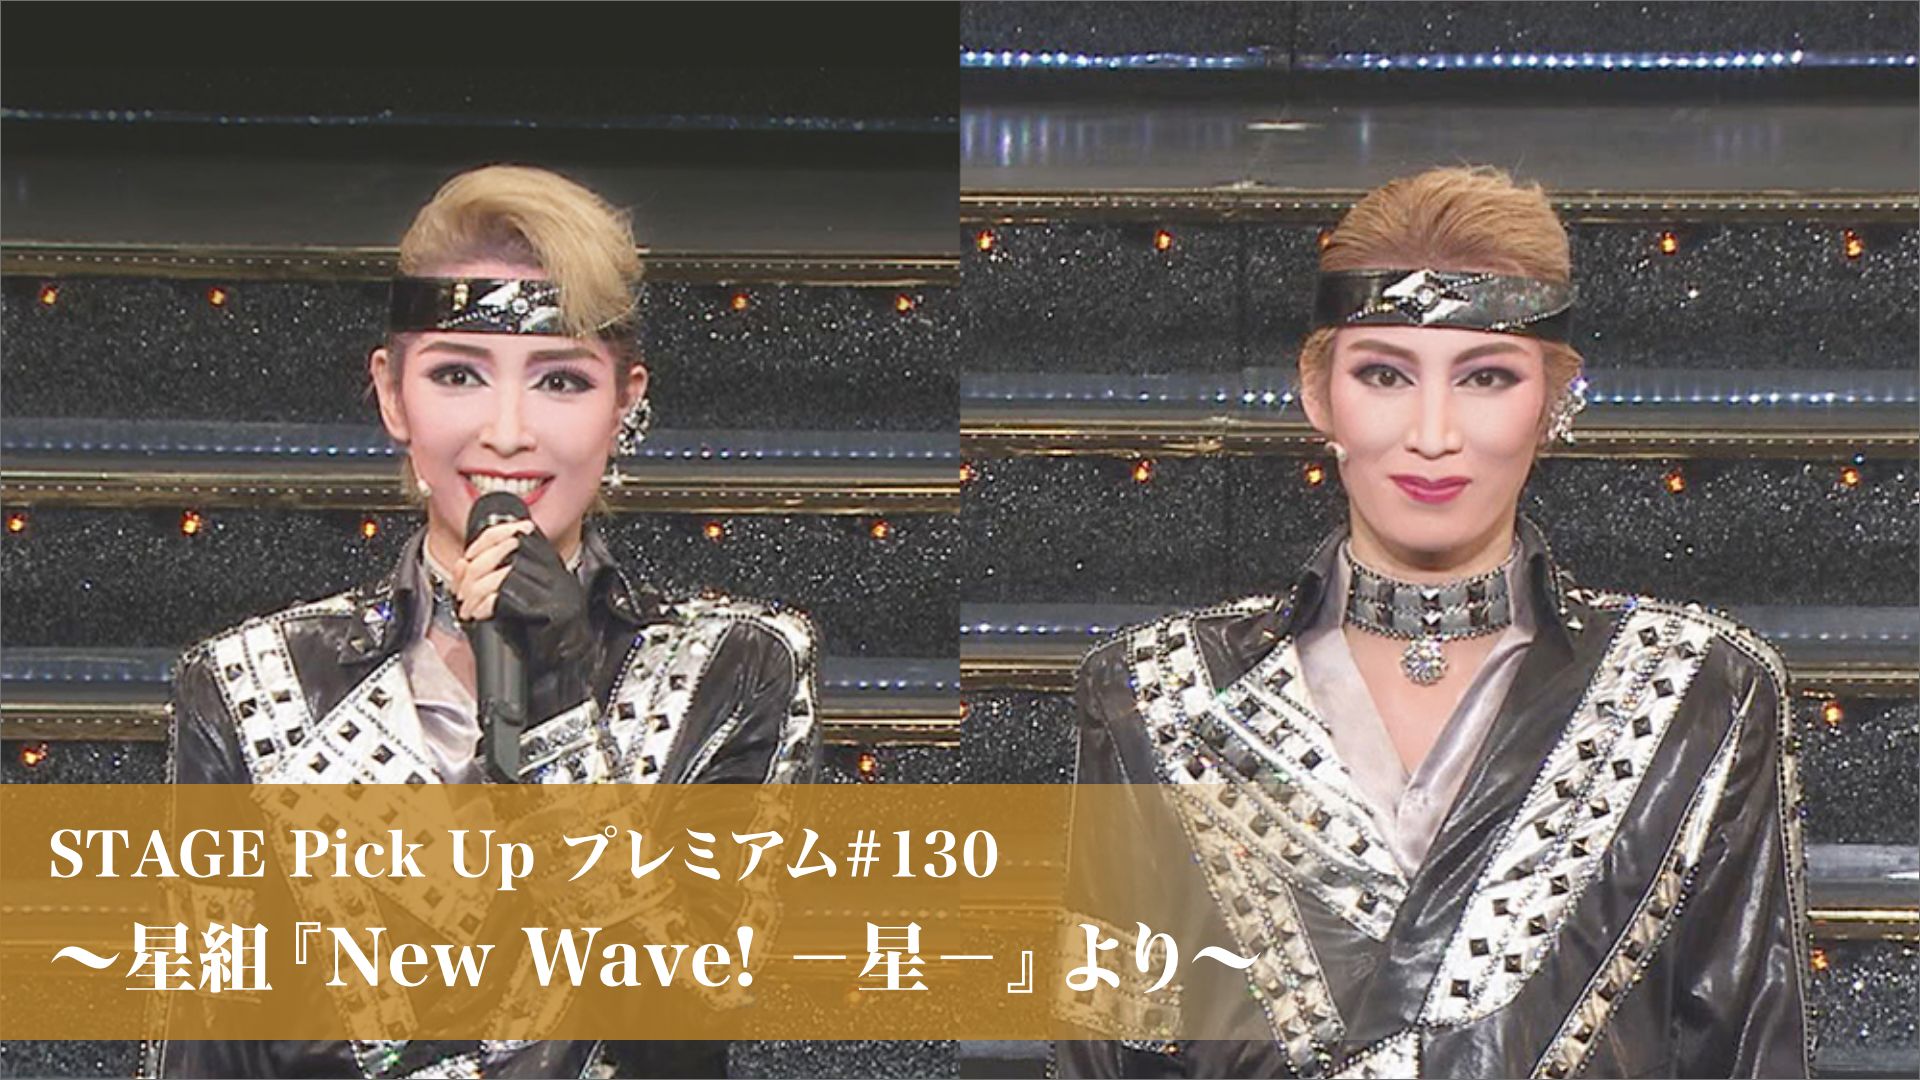 STAGE Pick Up プレミアム#130〜星組『New Wave! -星-』より〜